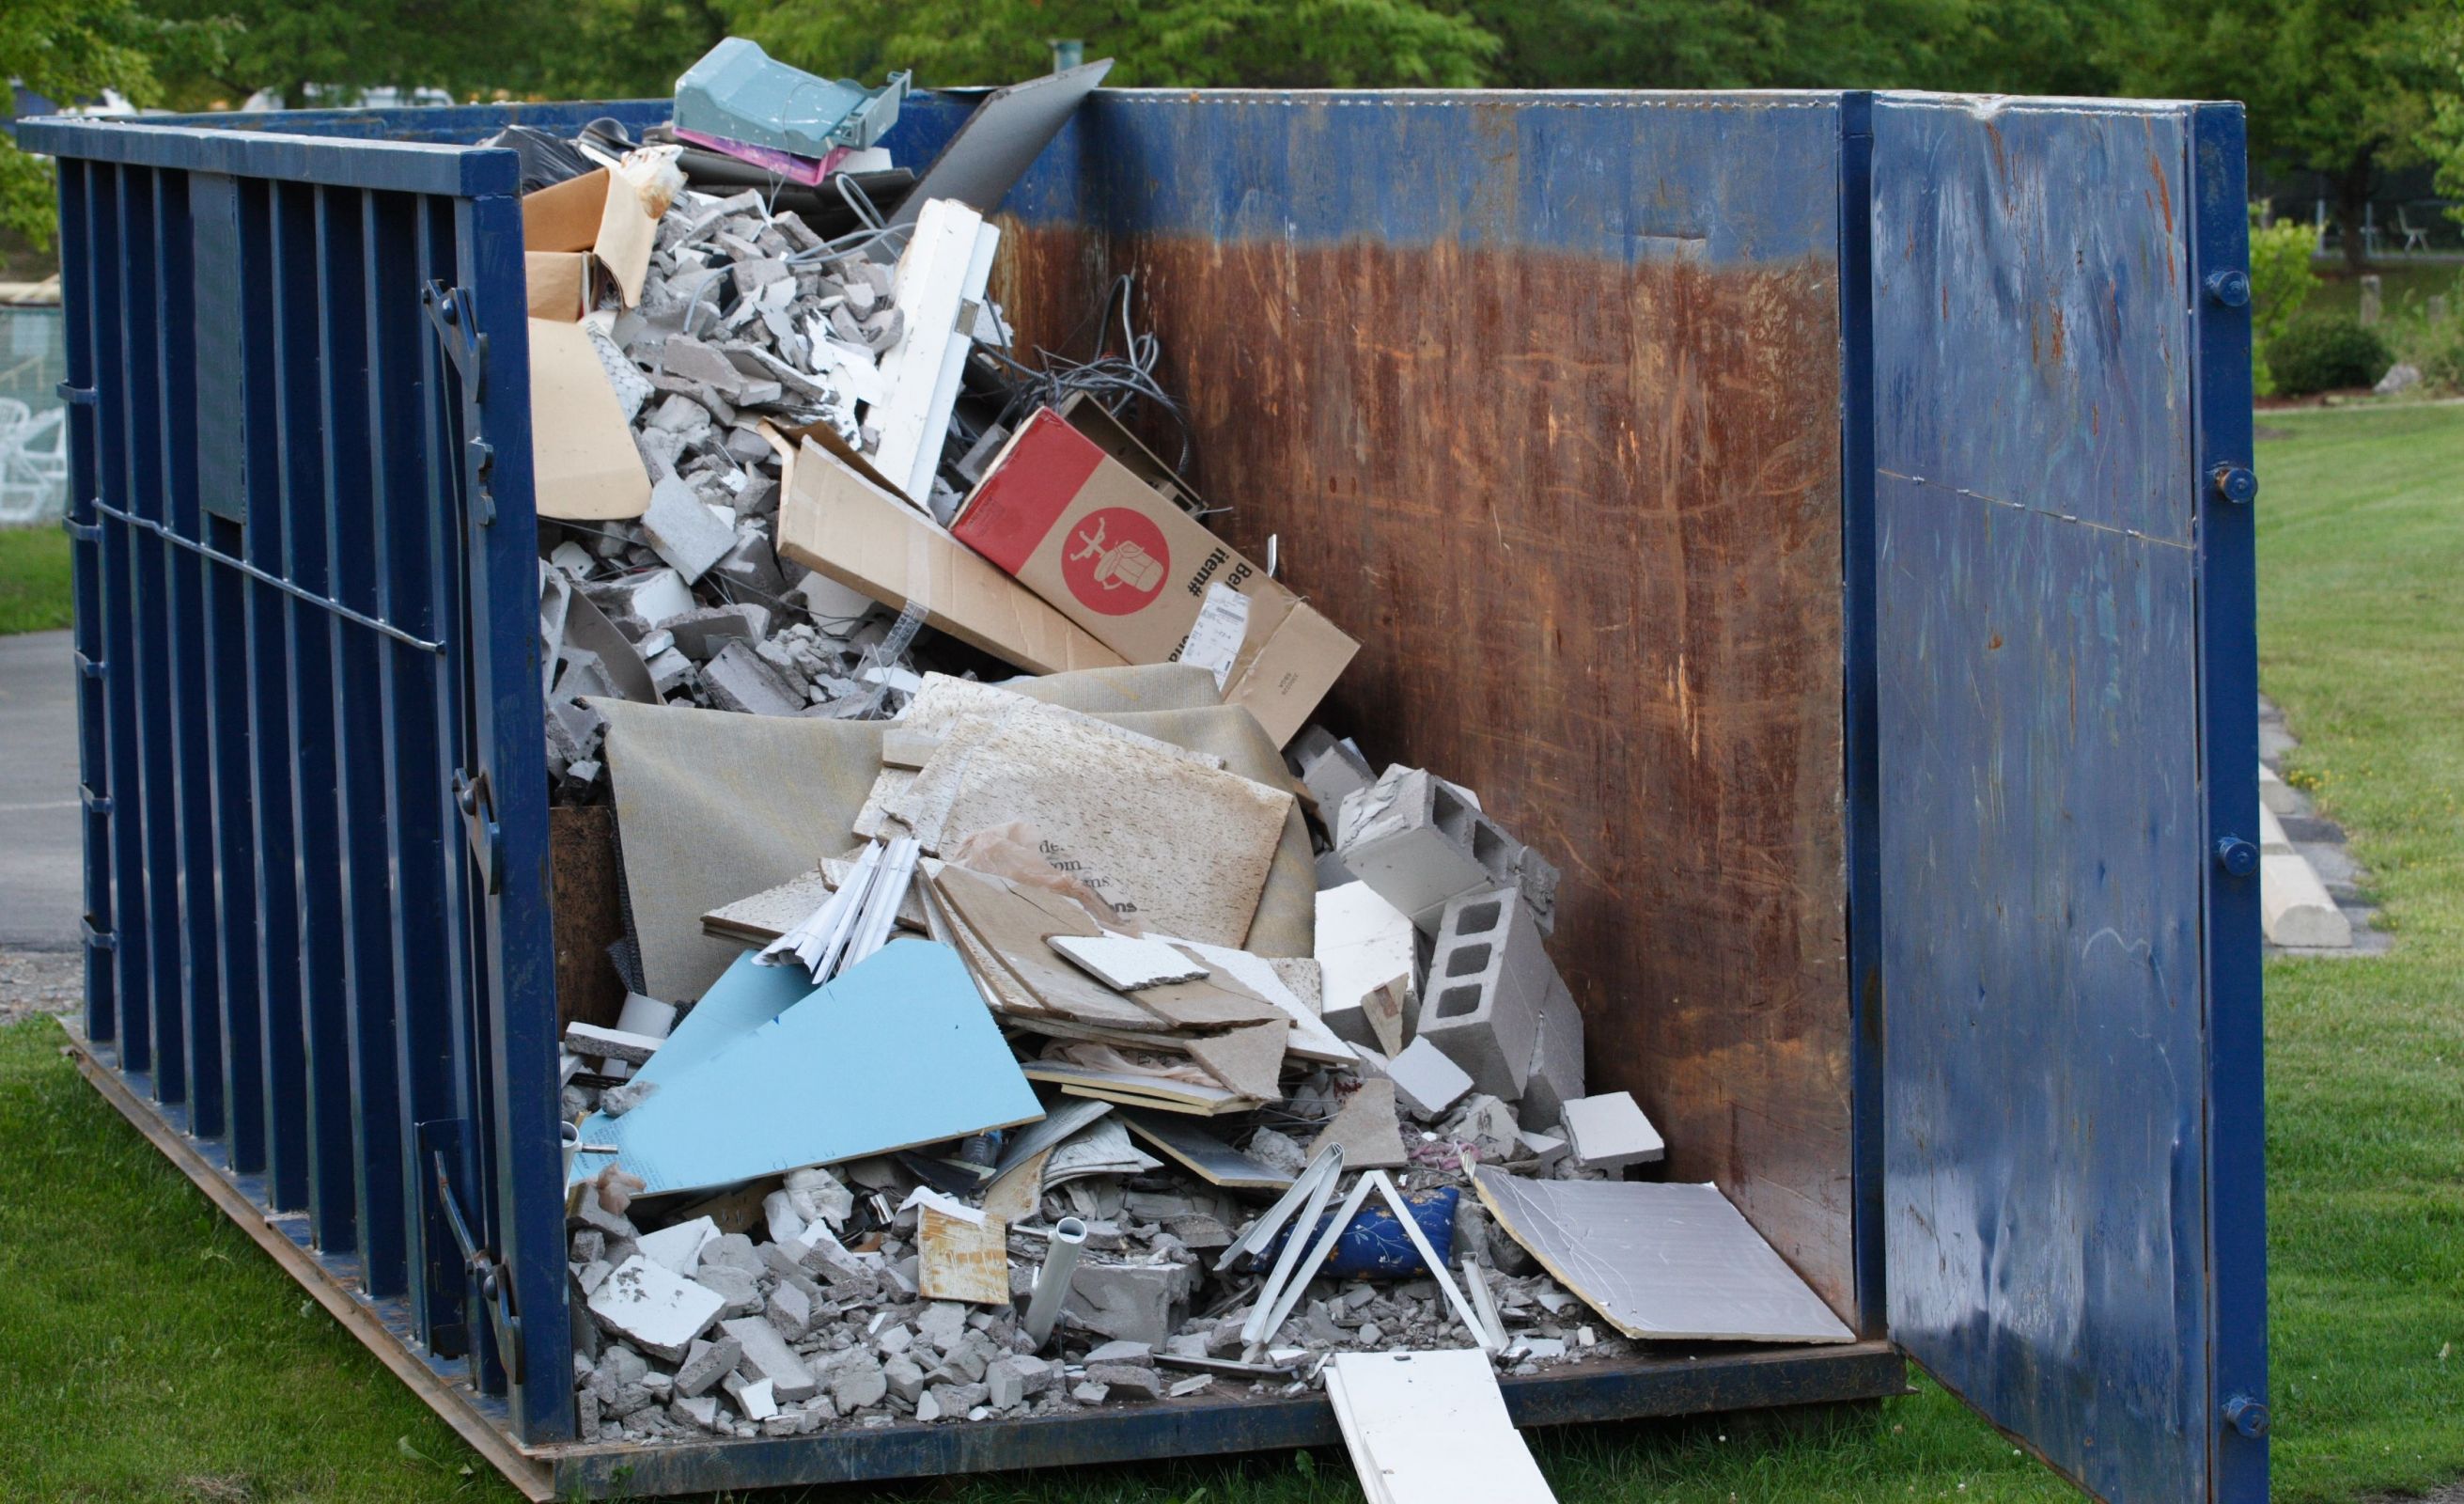 Residential Dumpster Rental in Minneapolis, MN Helps People Declutter Before the Holidays